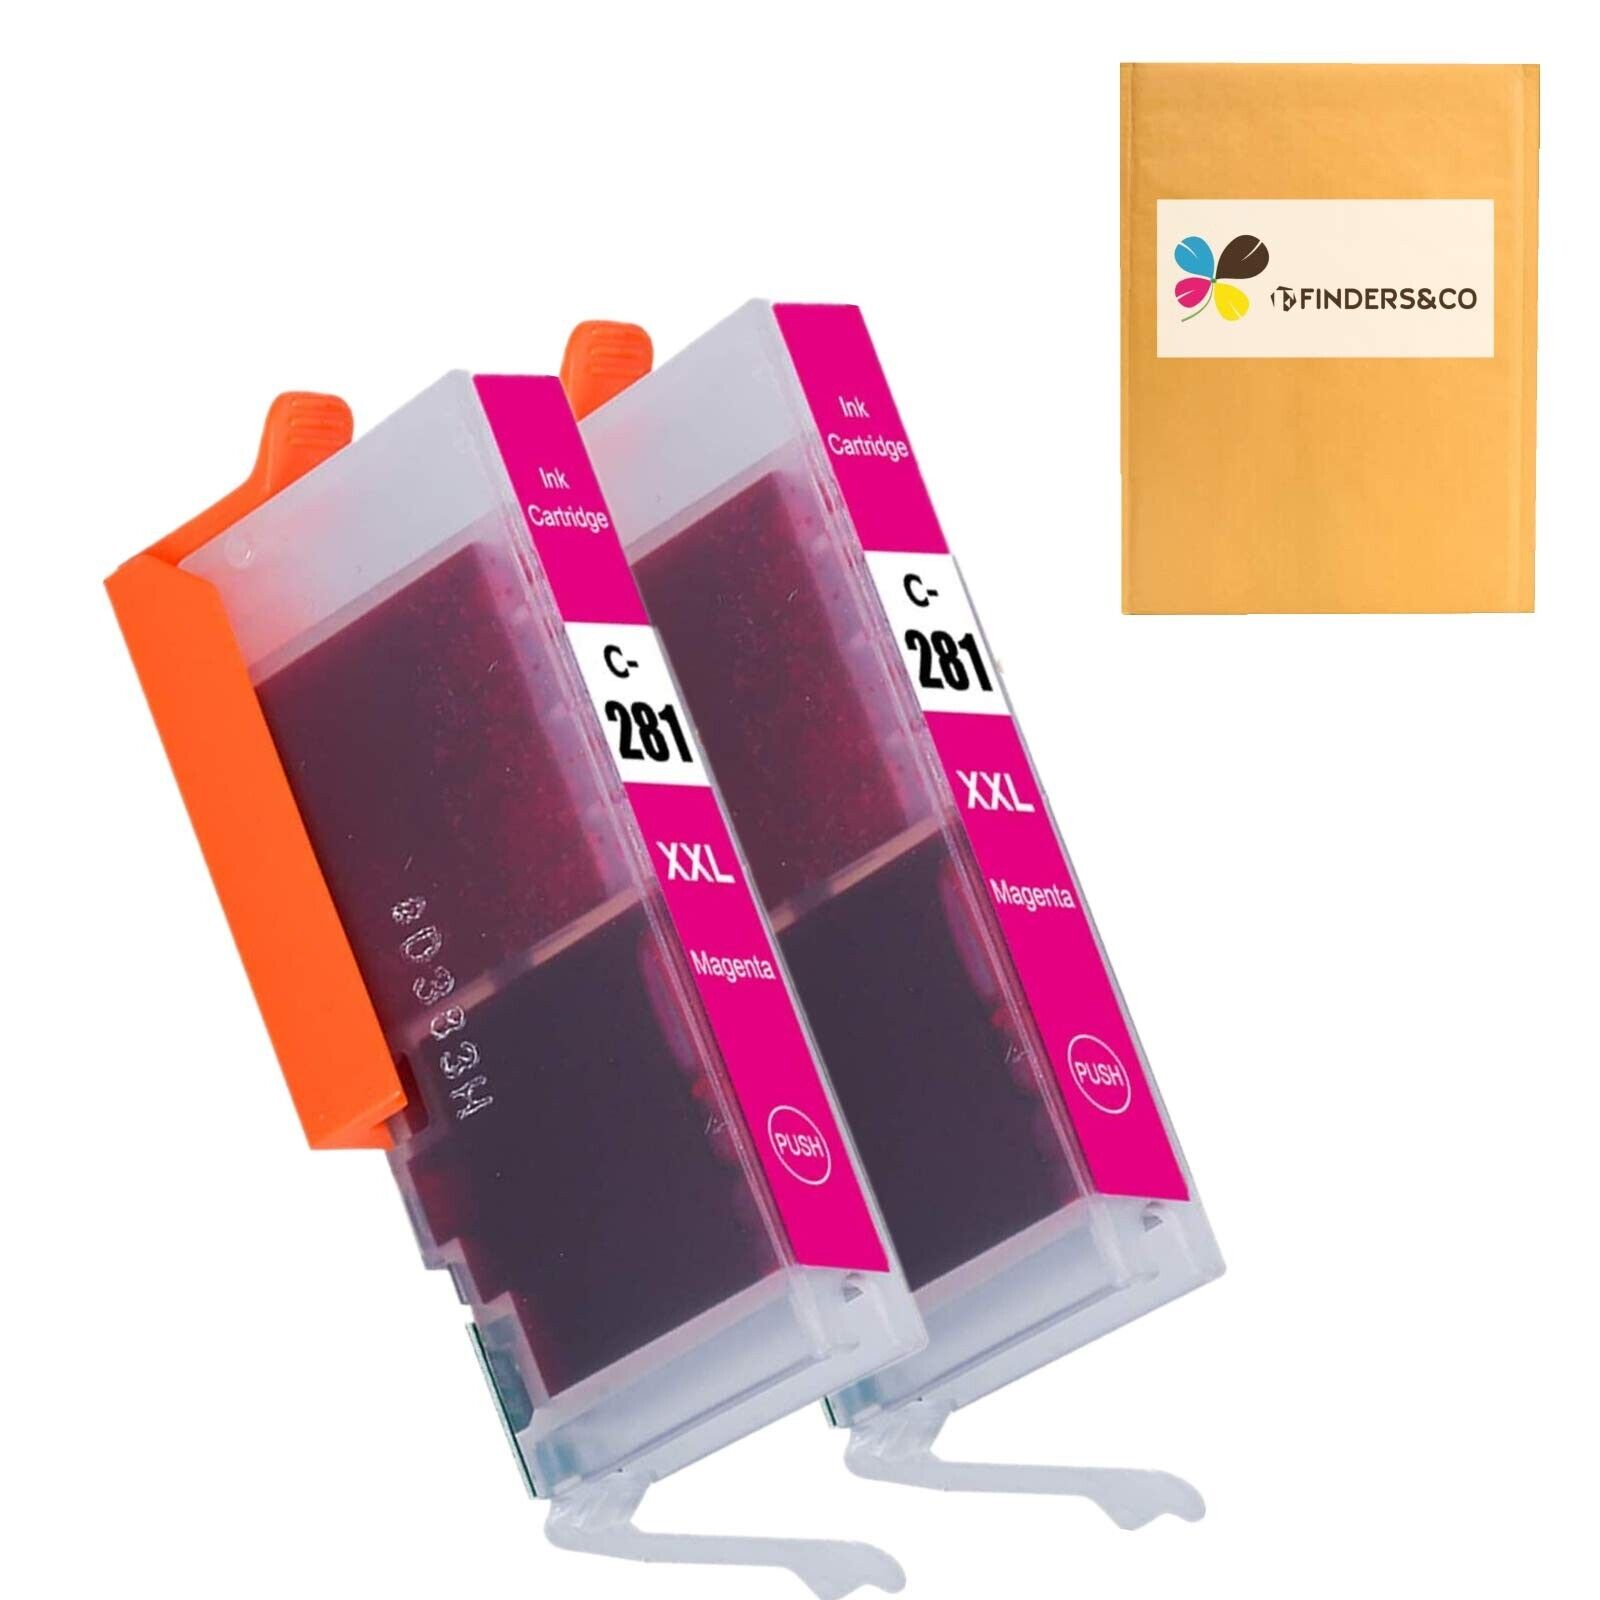 F FINDERS&CO CLI281 CLI-281 XXL Magenta Ink Cartridge Replacement for Canon C...